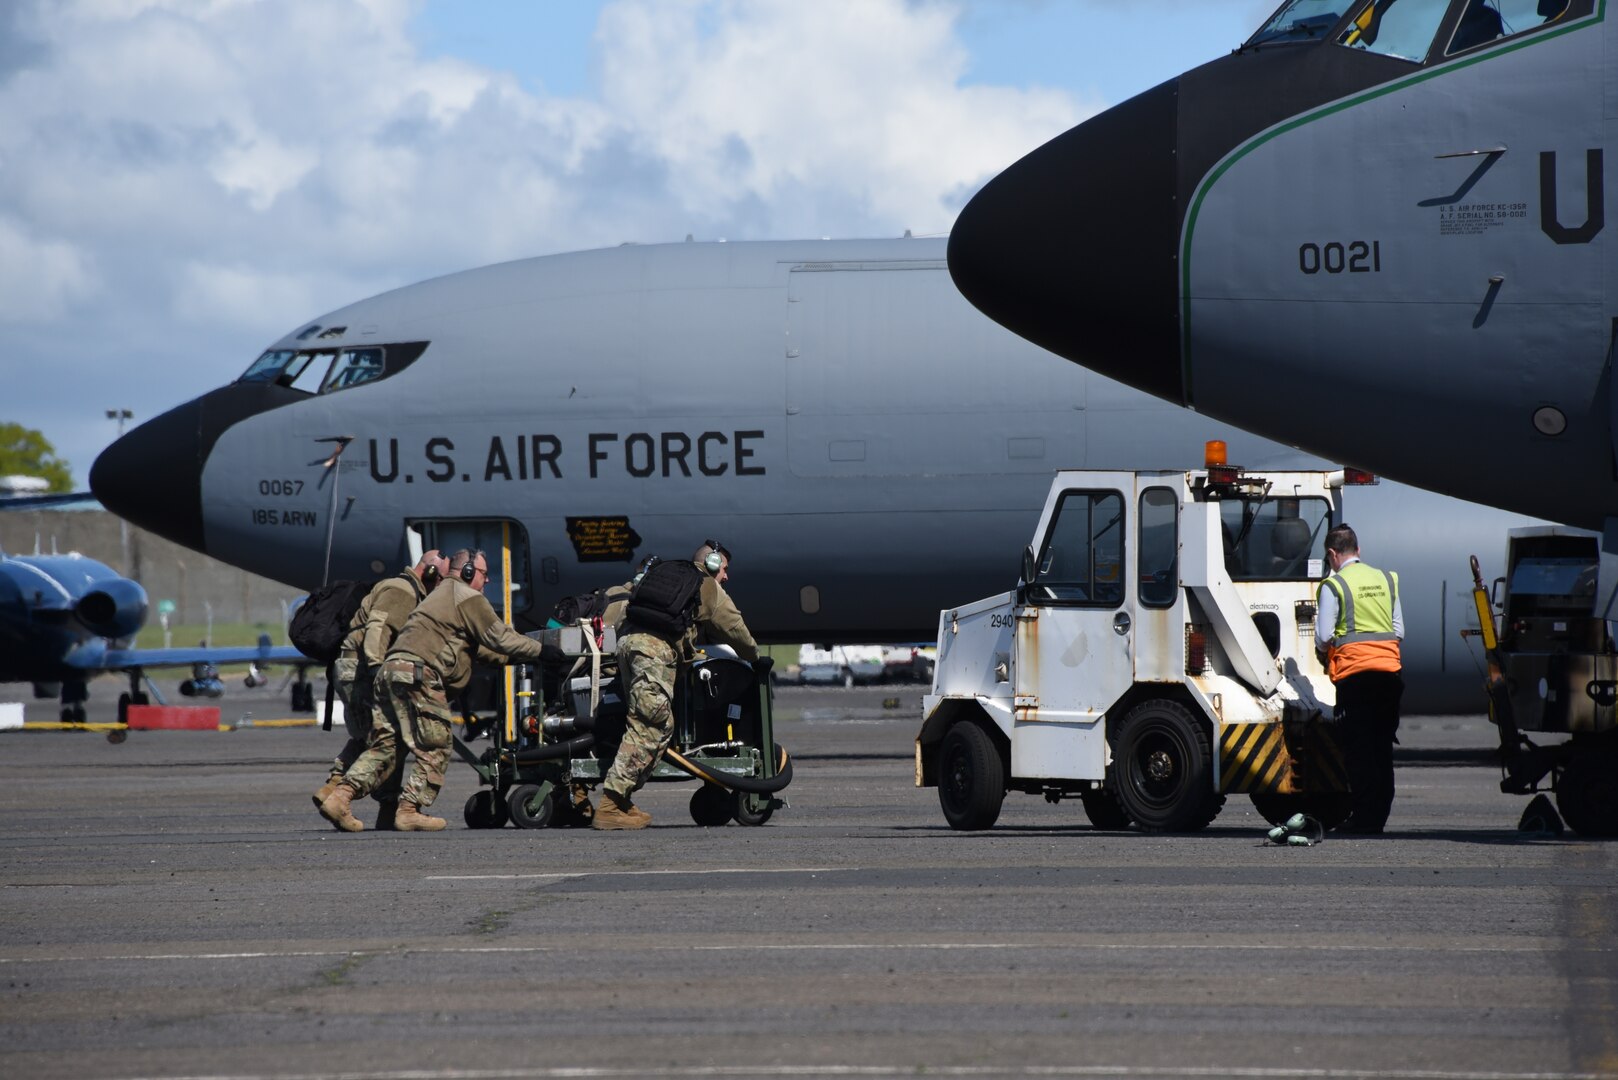 Airmen from the Iowa Air National Guard’s 185th Air Refueling Wing move a fuel system icing inhibitor cart in place to begin refueling a U.S. Air Force KC-135 on the flight line at the Glasgow Prestwick International Airport, Scotland, May 18, 2021. The portable fuel injection system is used to add deicing fuel additive during ground refueling. Air Guard Airmen and their refueling aircraft are in Scotland providing air refueling support as part of NATO exercise Formidable Shield.